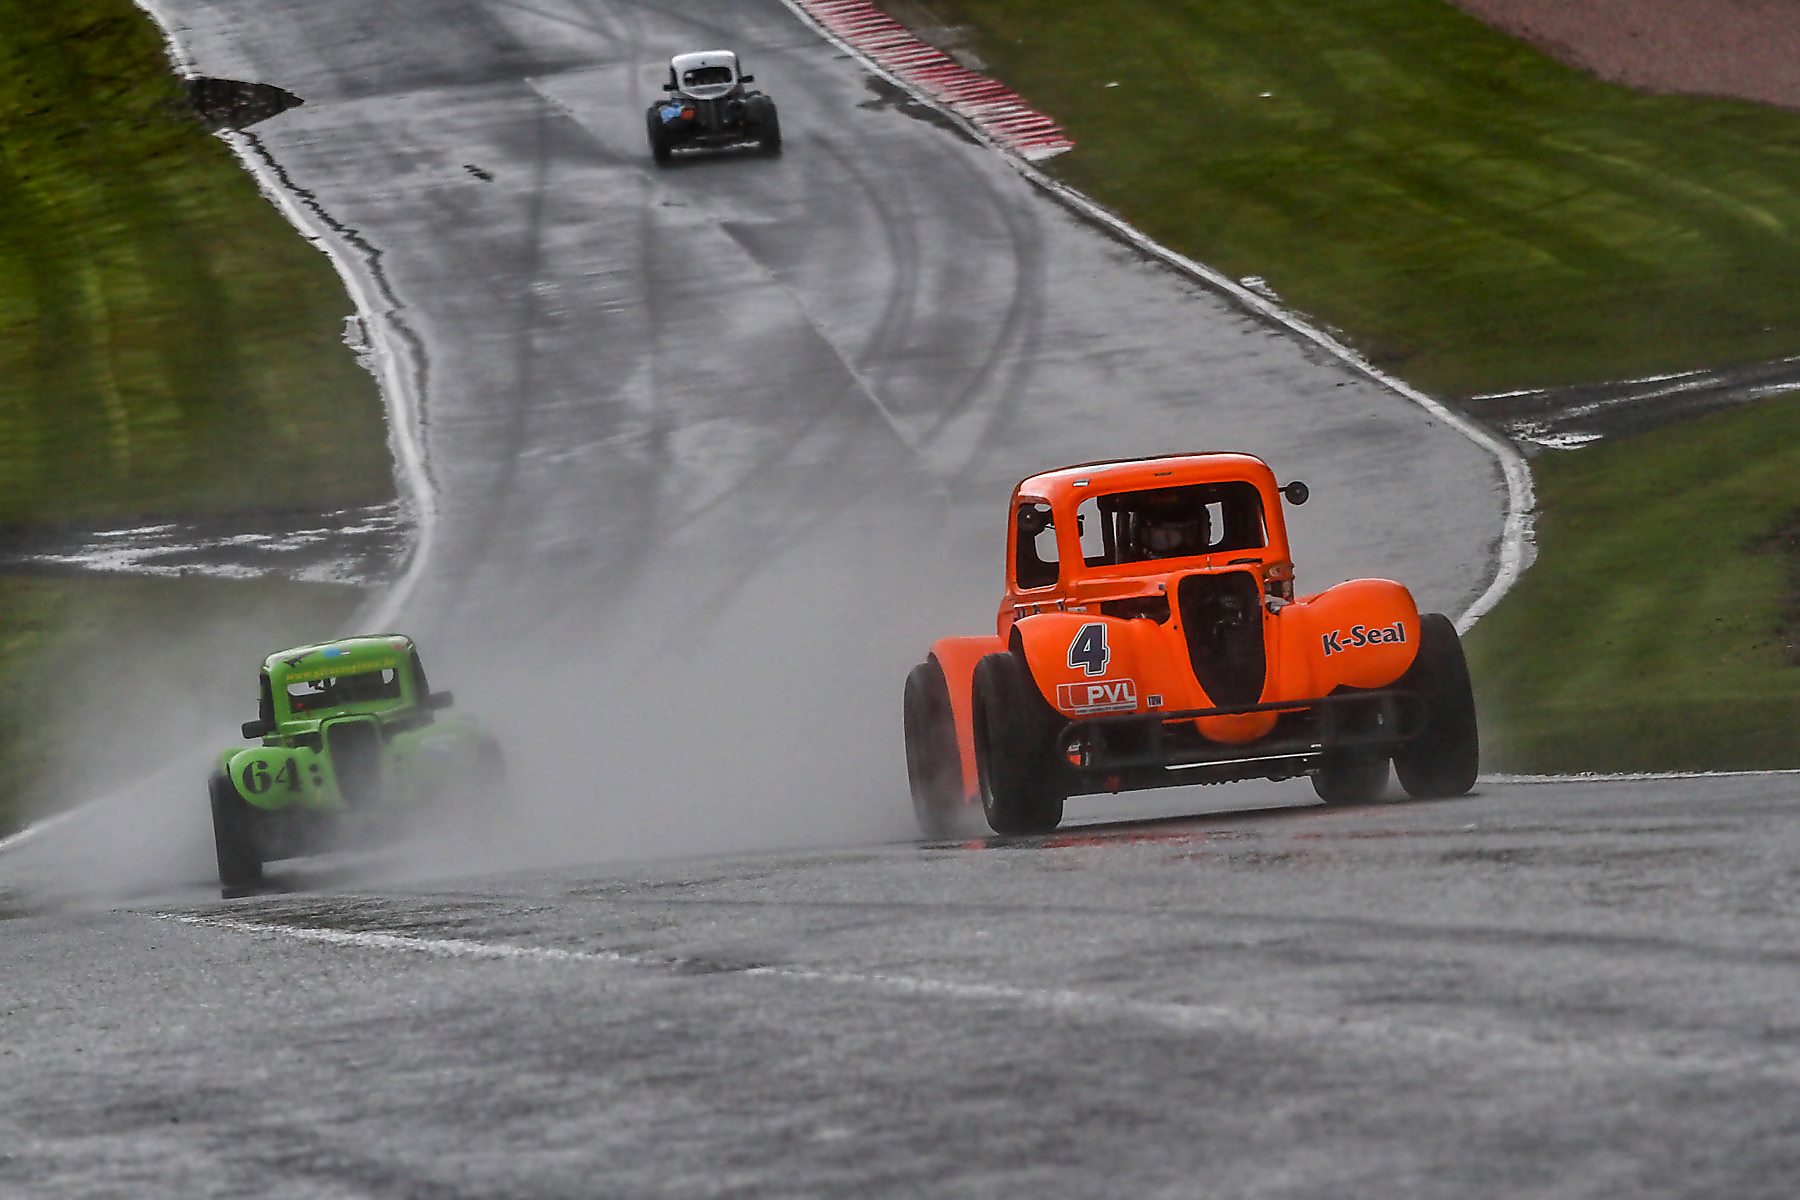 2015 - Round 1 - Oulton Park Gallery Image 19